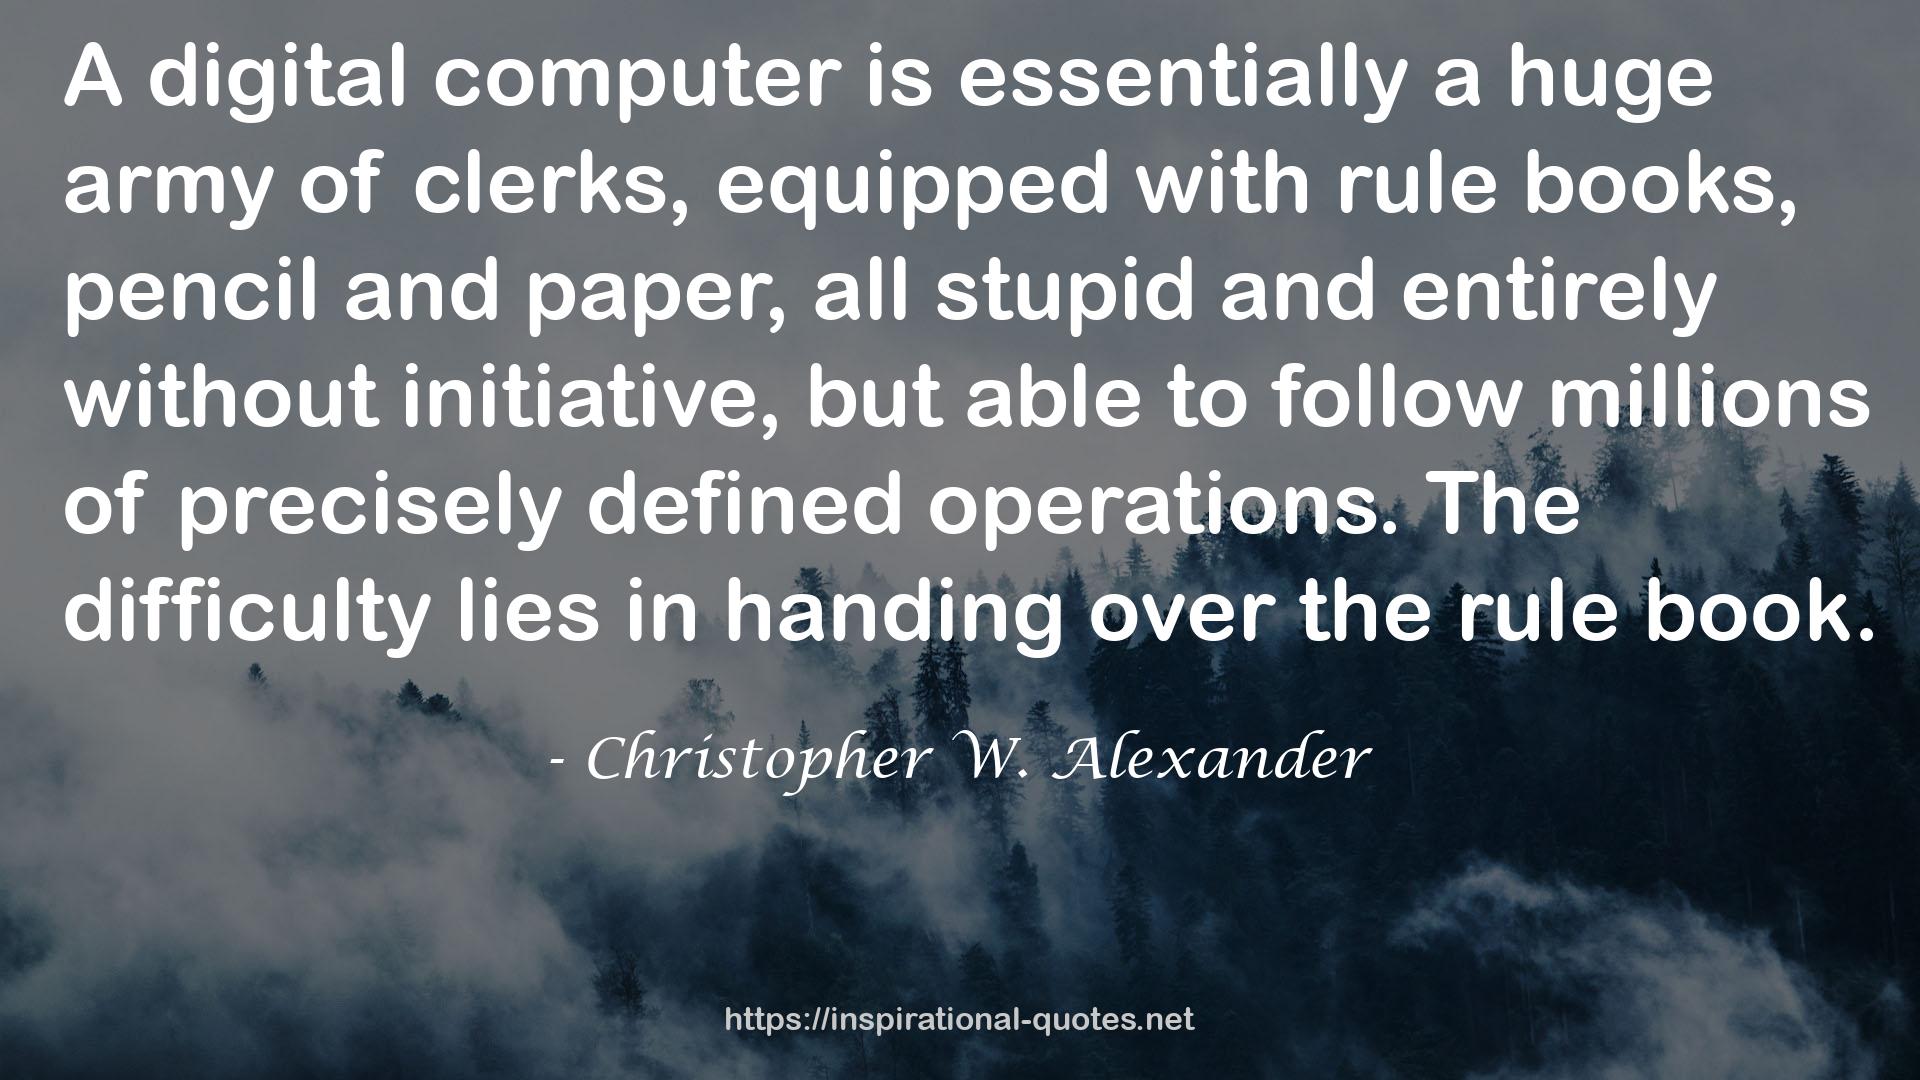 Christopher W. Alexander QUOTES